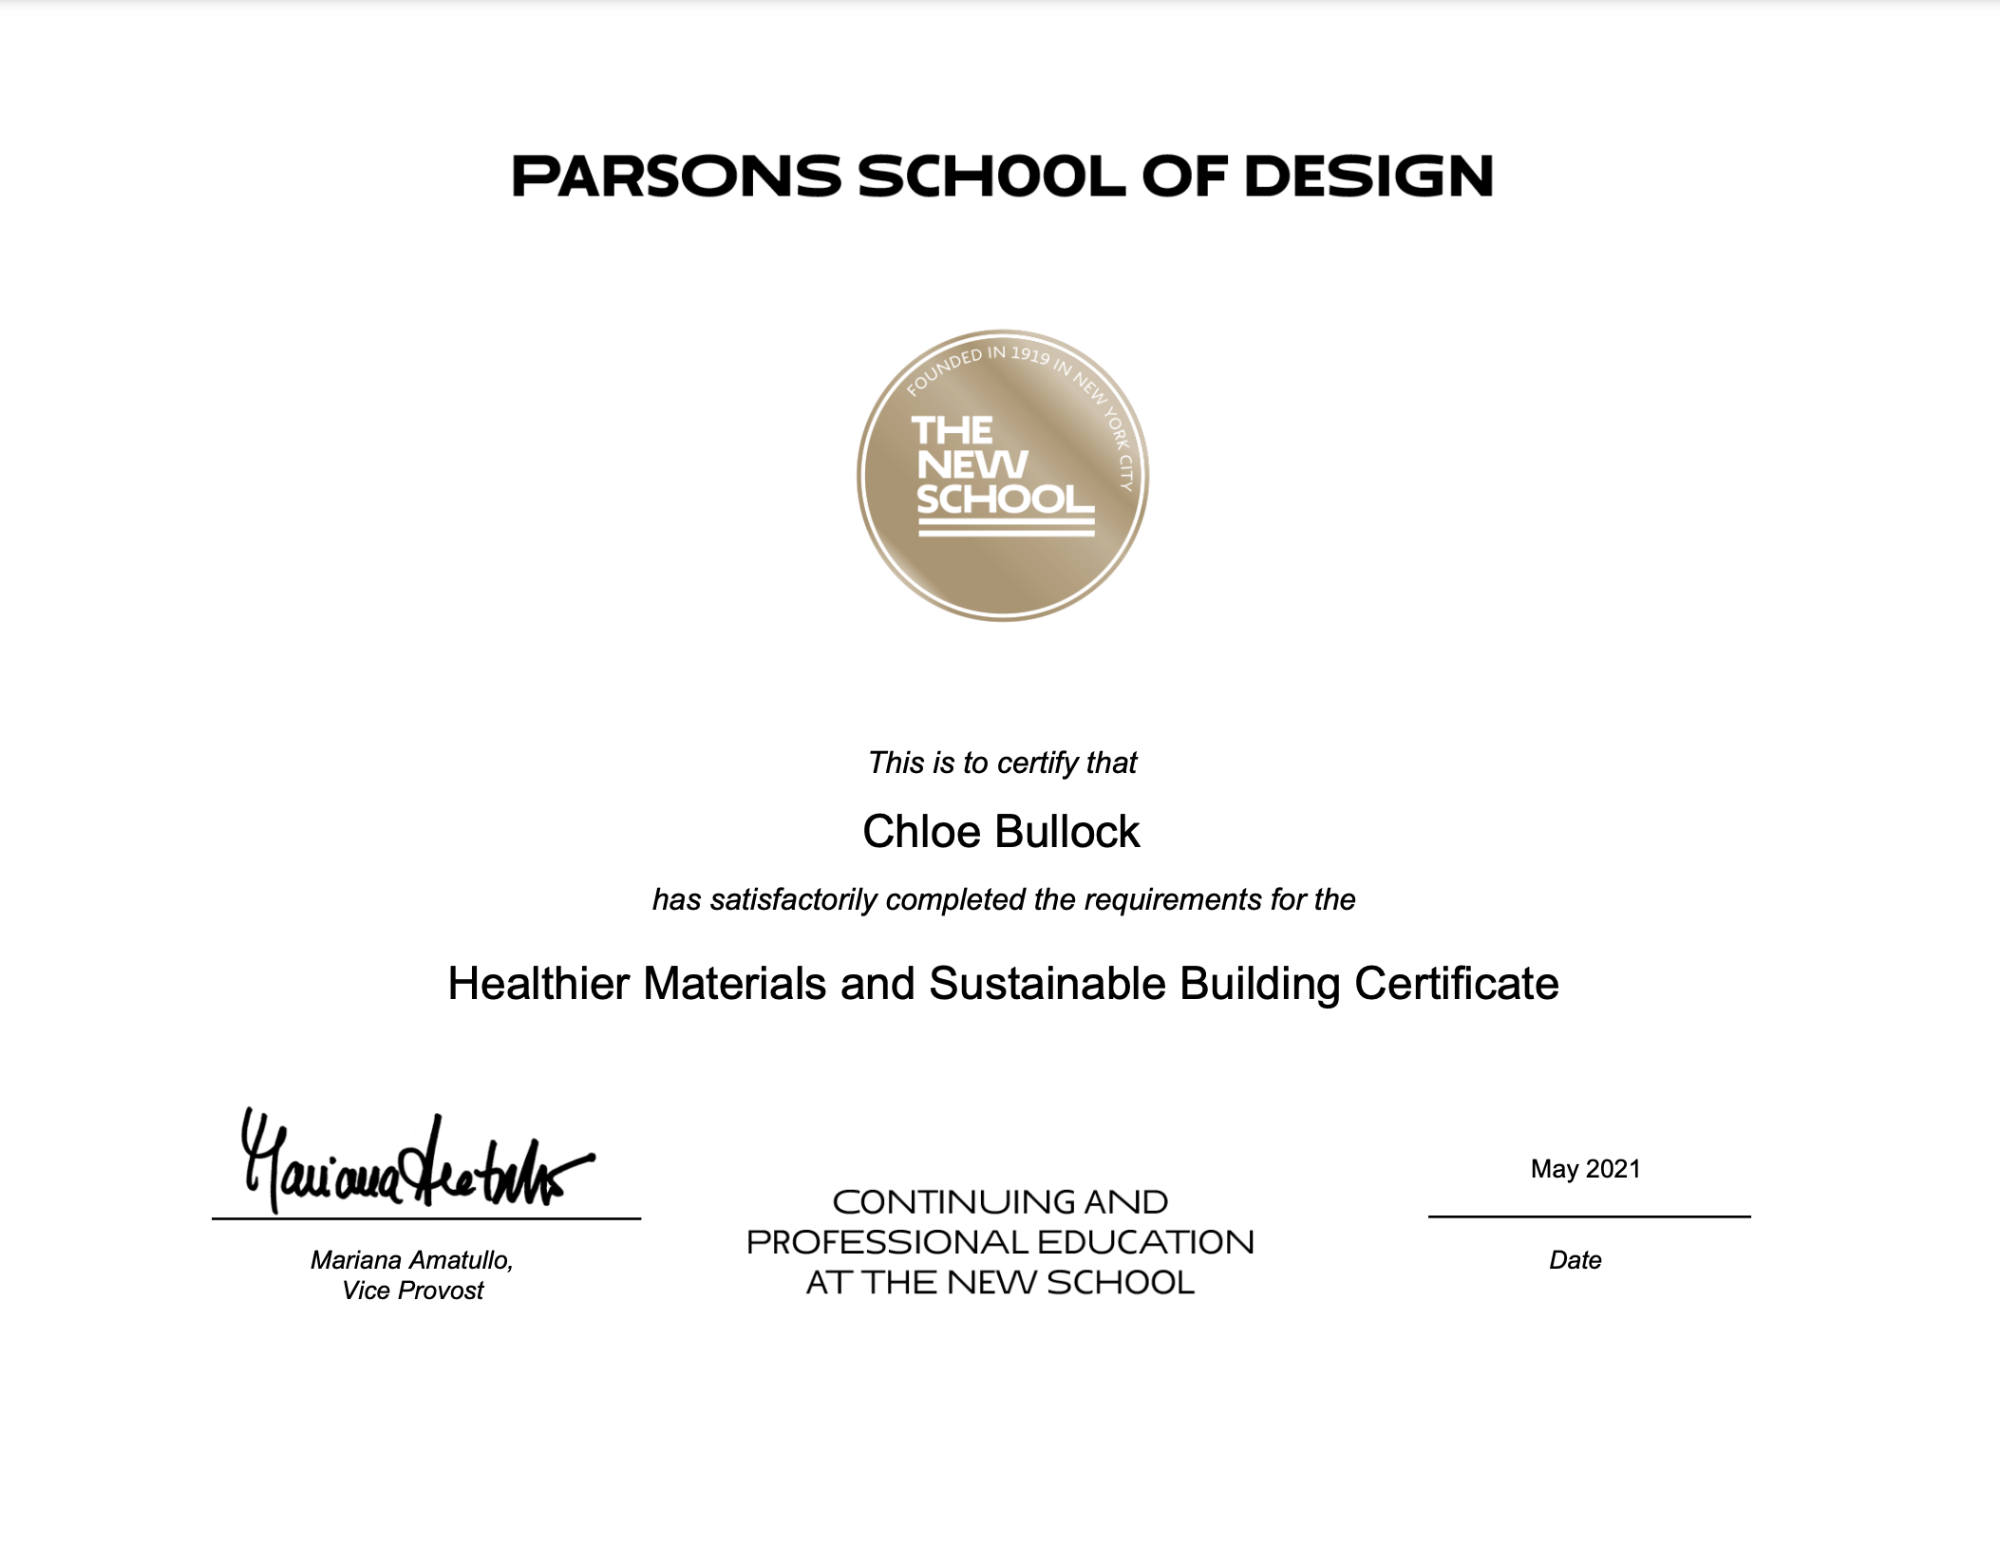 Parsons / New School "Online Certificate Program: Healthier Materials and Sustainable Building